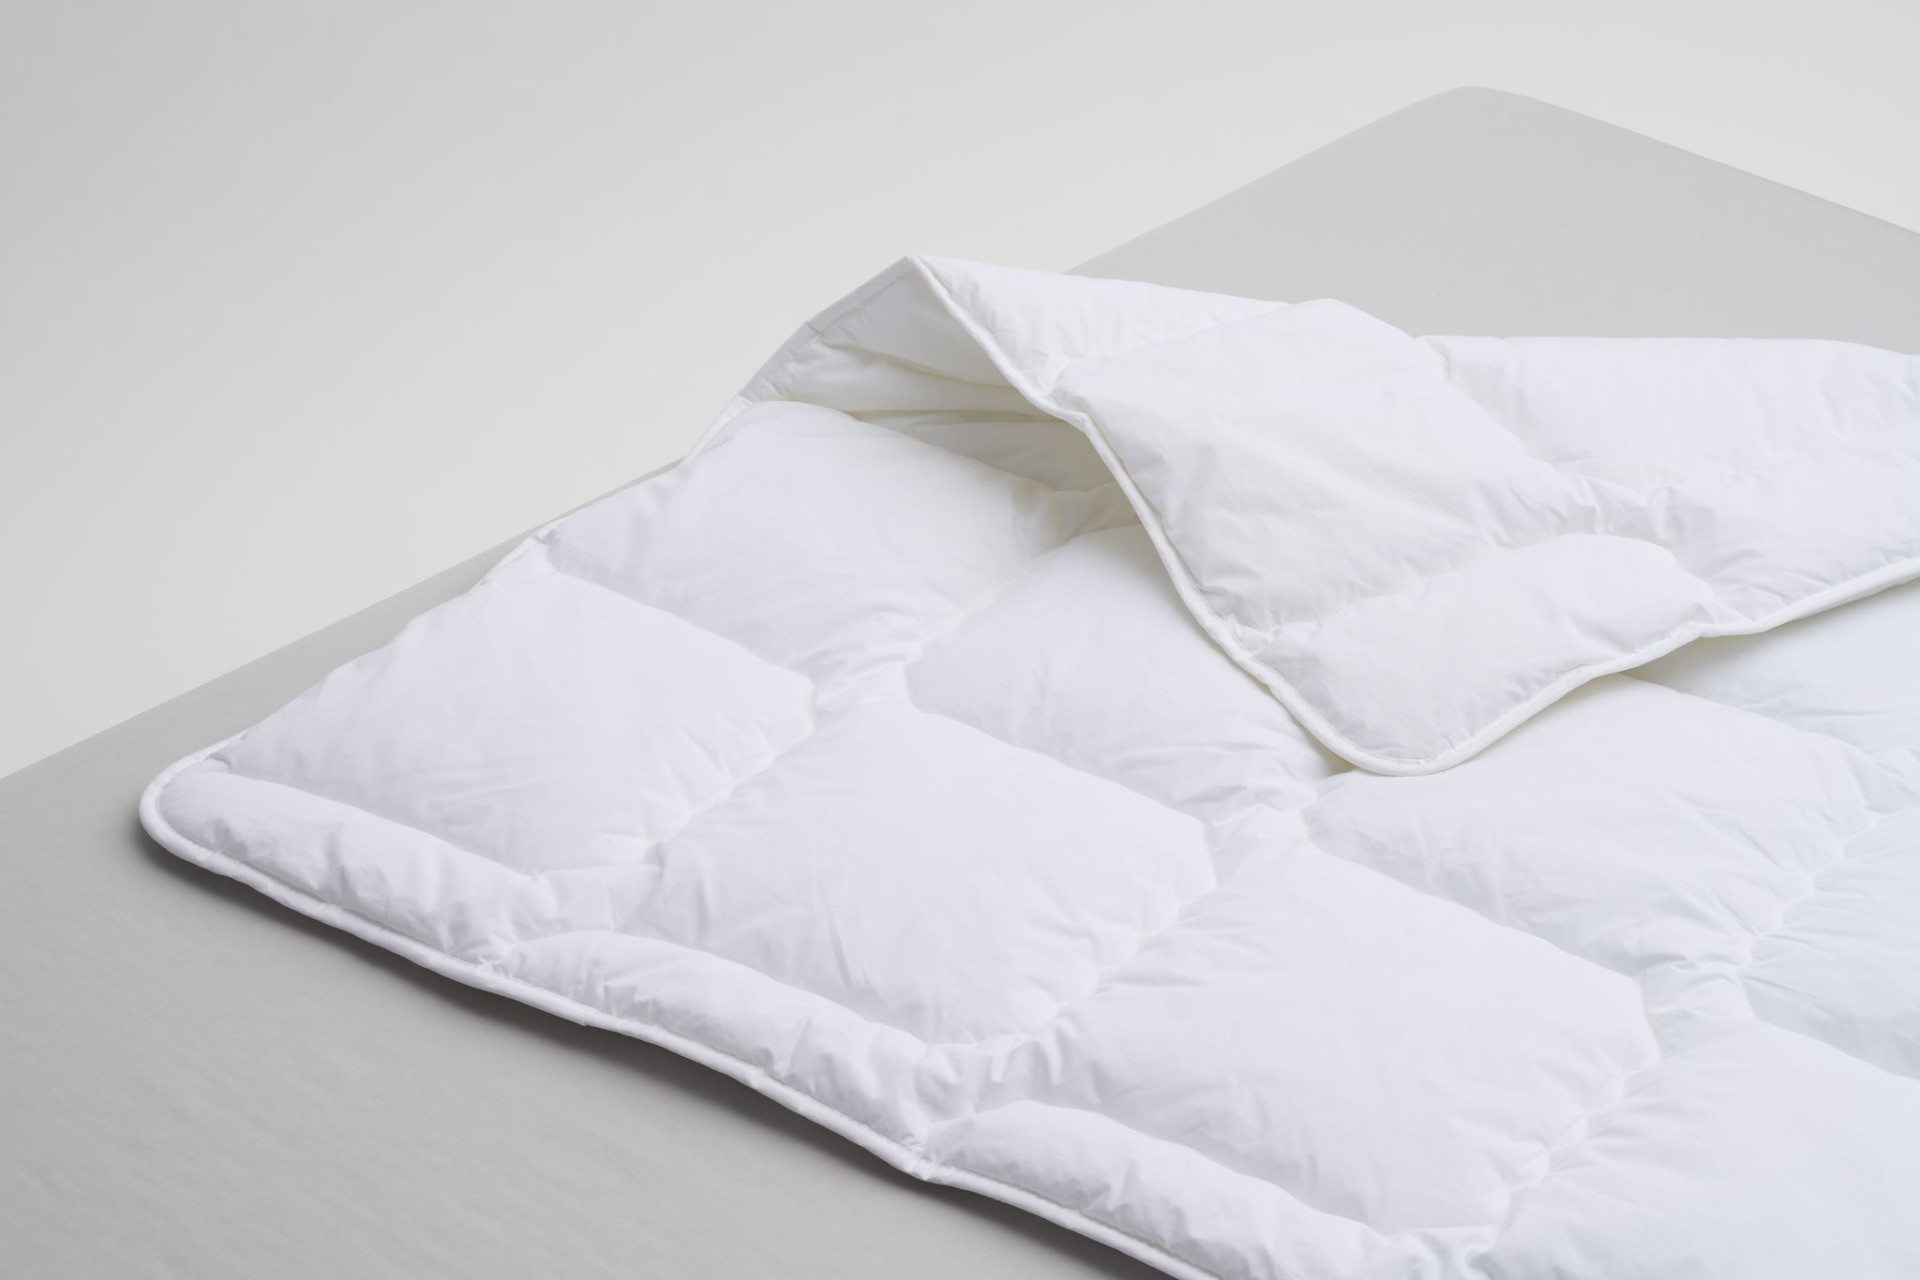 Our Comfort Lightweight duvets are machine washable and hypoallergic.